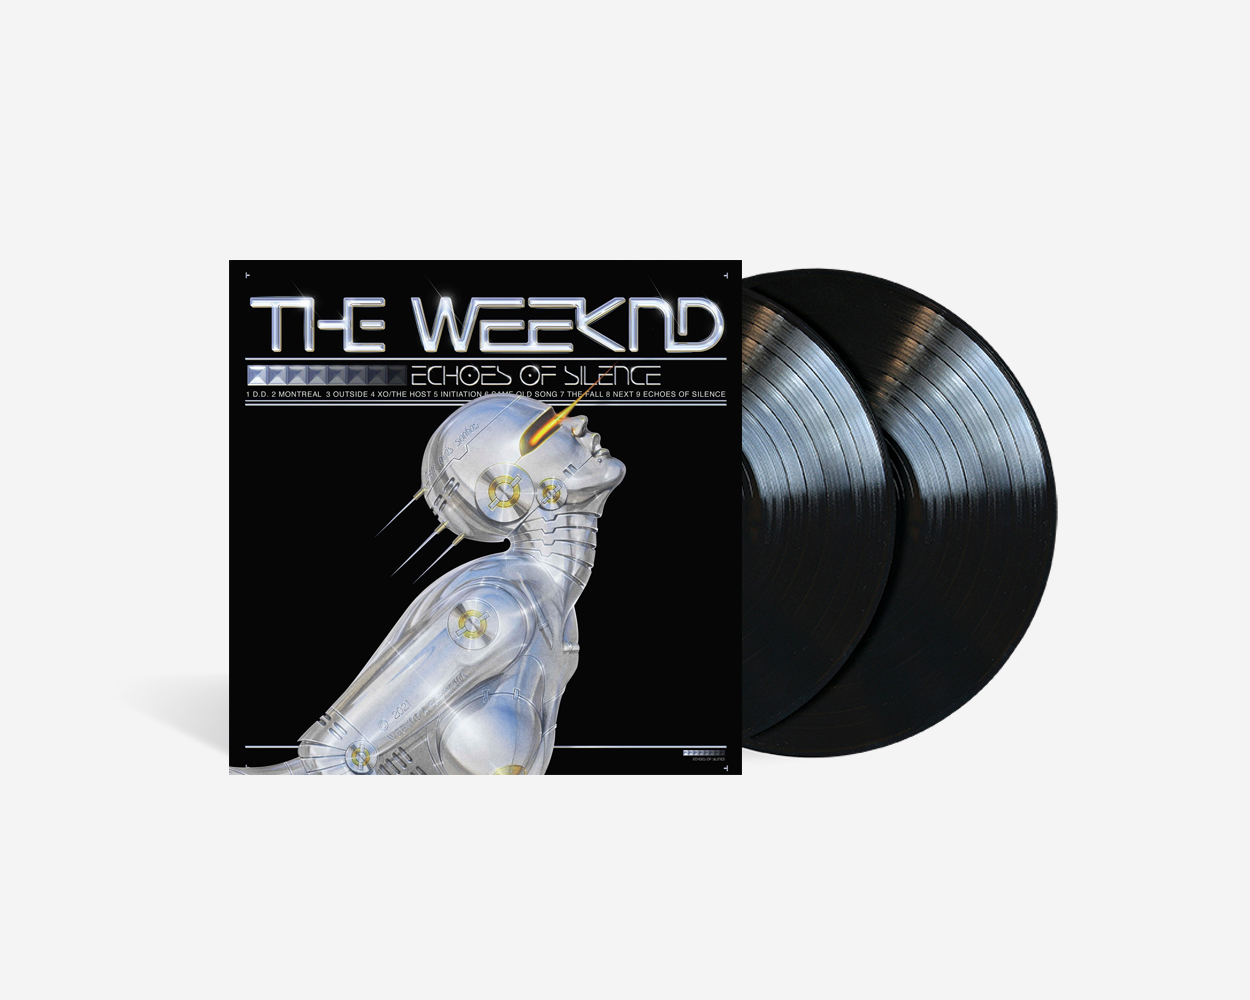 https://quals.ua/image/catalog/Covers/the-weeknd-echoes-of-silence-deluxe-sorayama-edition-vinyl.jpg